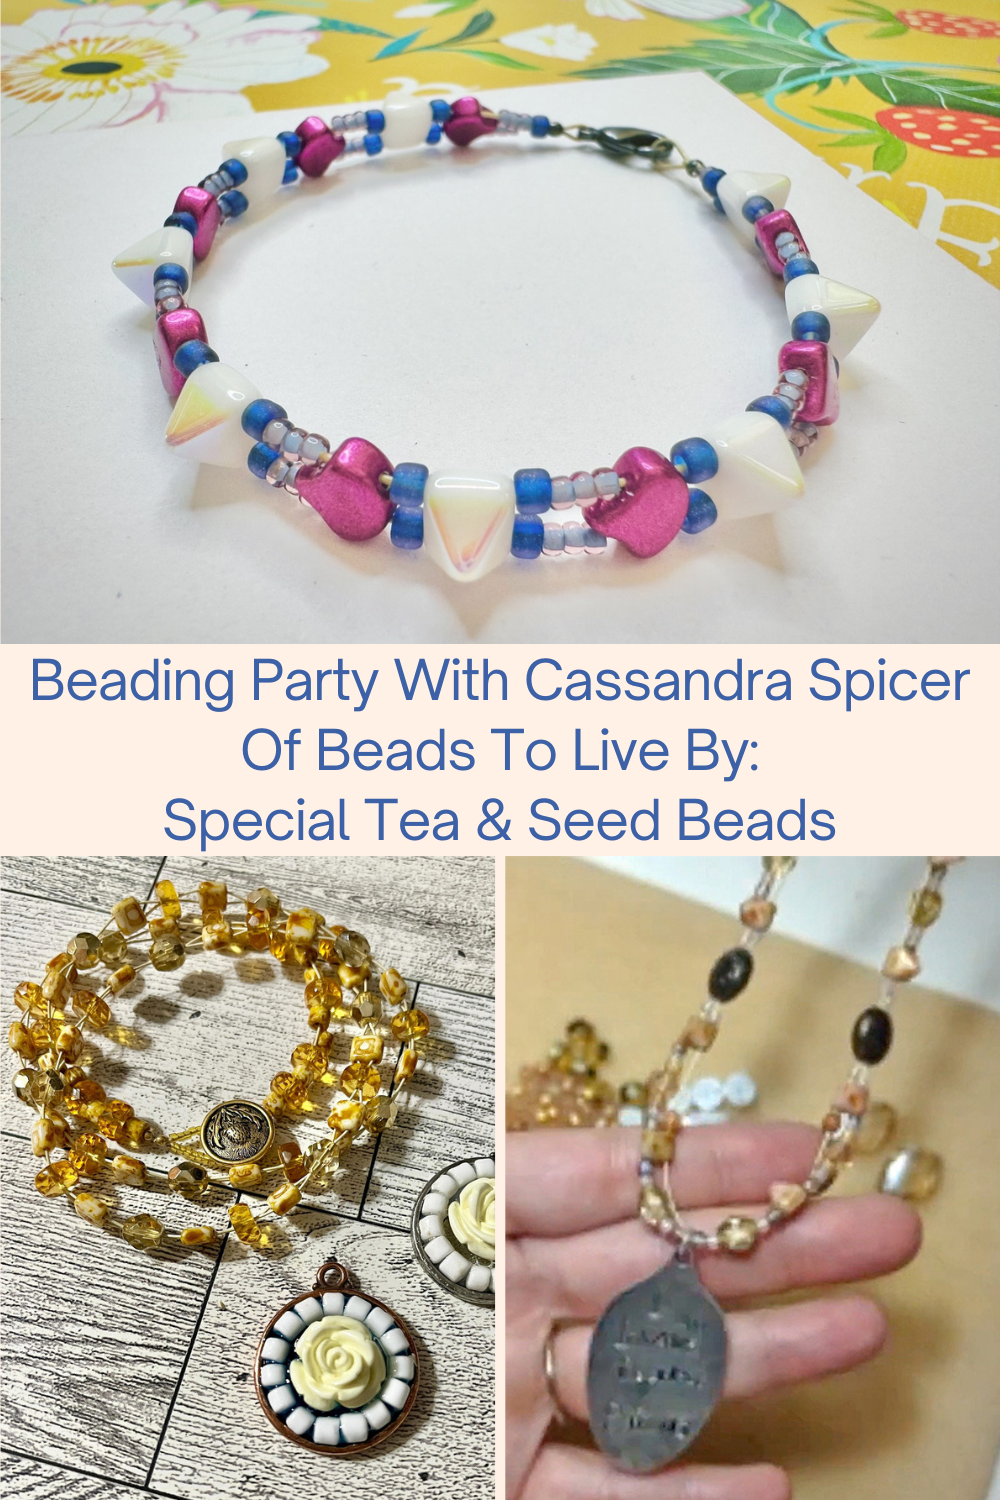 Beading Party With Cassandra Spicer Of Beads To Live By Special Tea & Seed Beads Collage